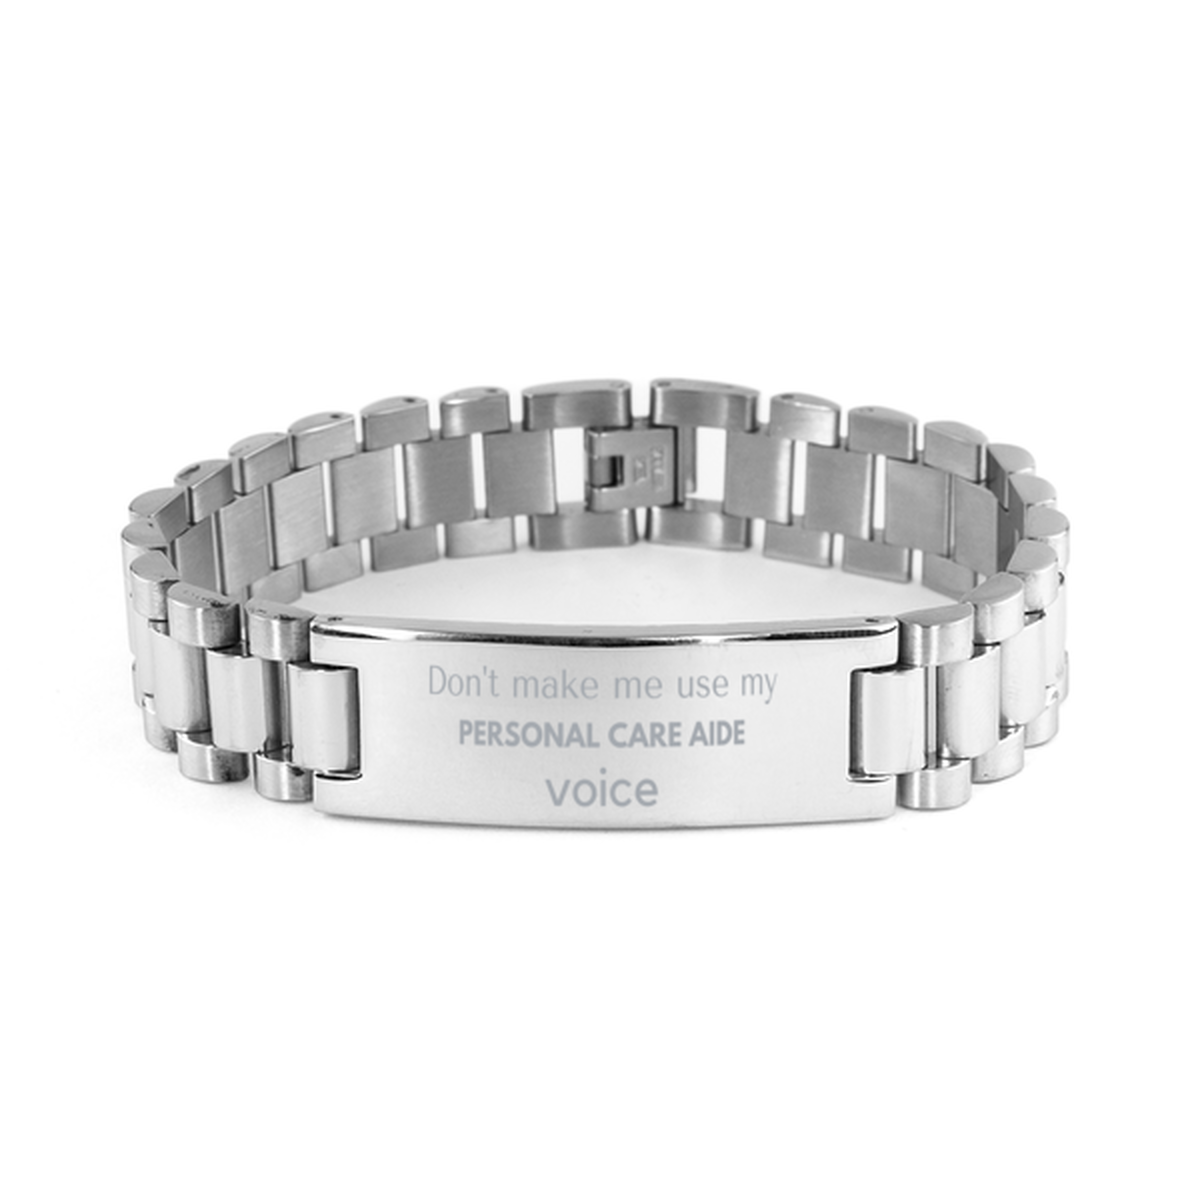 Don't make me use my Personal Care Aide voice, Sarcasm Personal Care Aide Gifts, Christmas Personal Care Aide Ladder Stainless Steel Bracelet Birthday Unique Gifts For Personal Care Aide Coworkers, Men, Women, Colleague, Friends